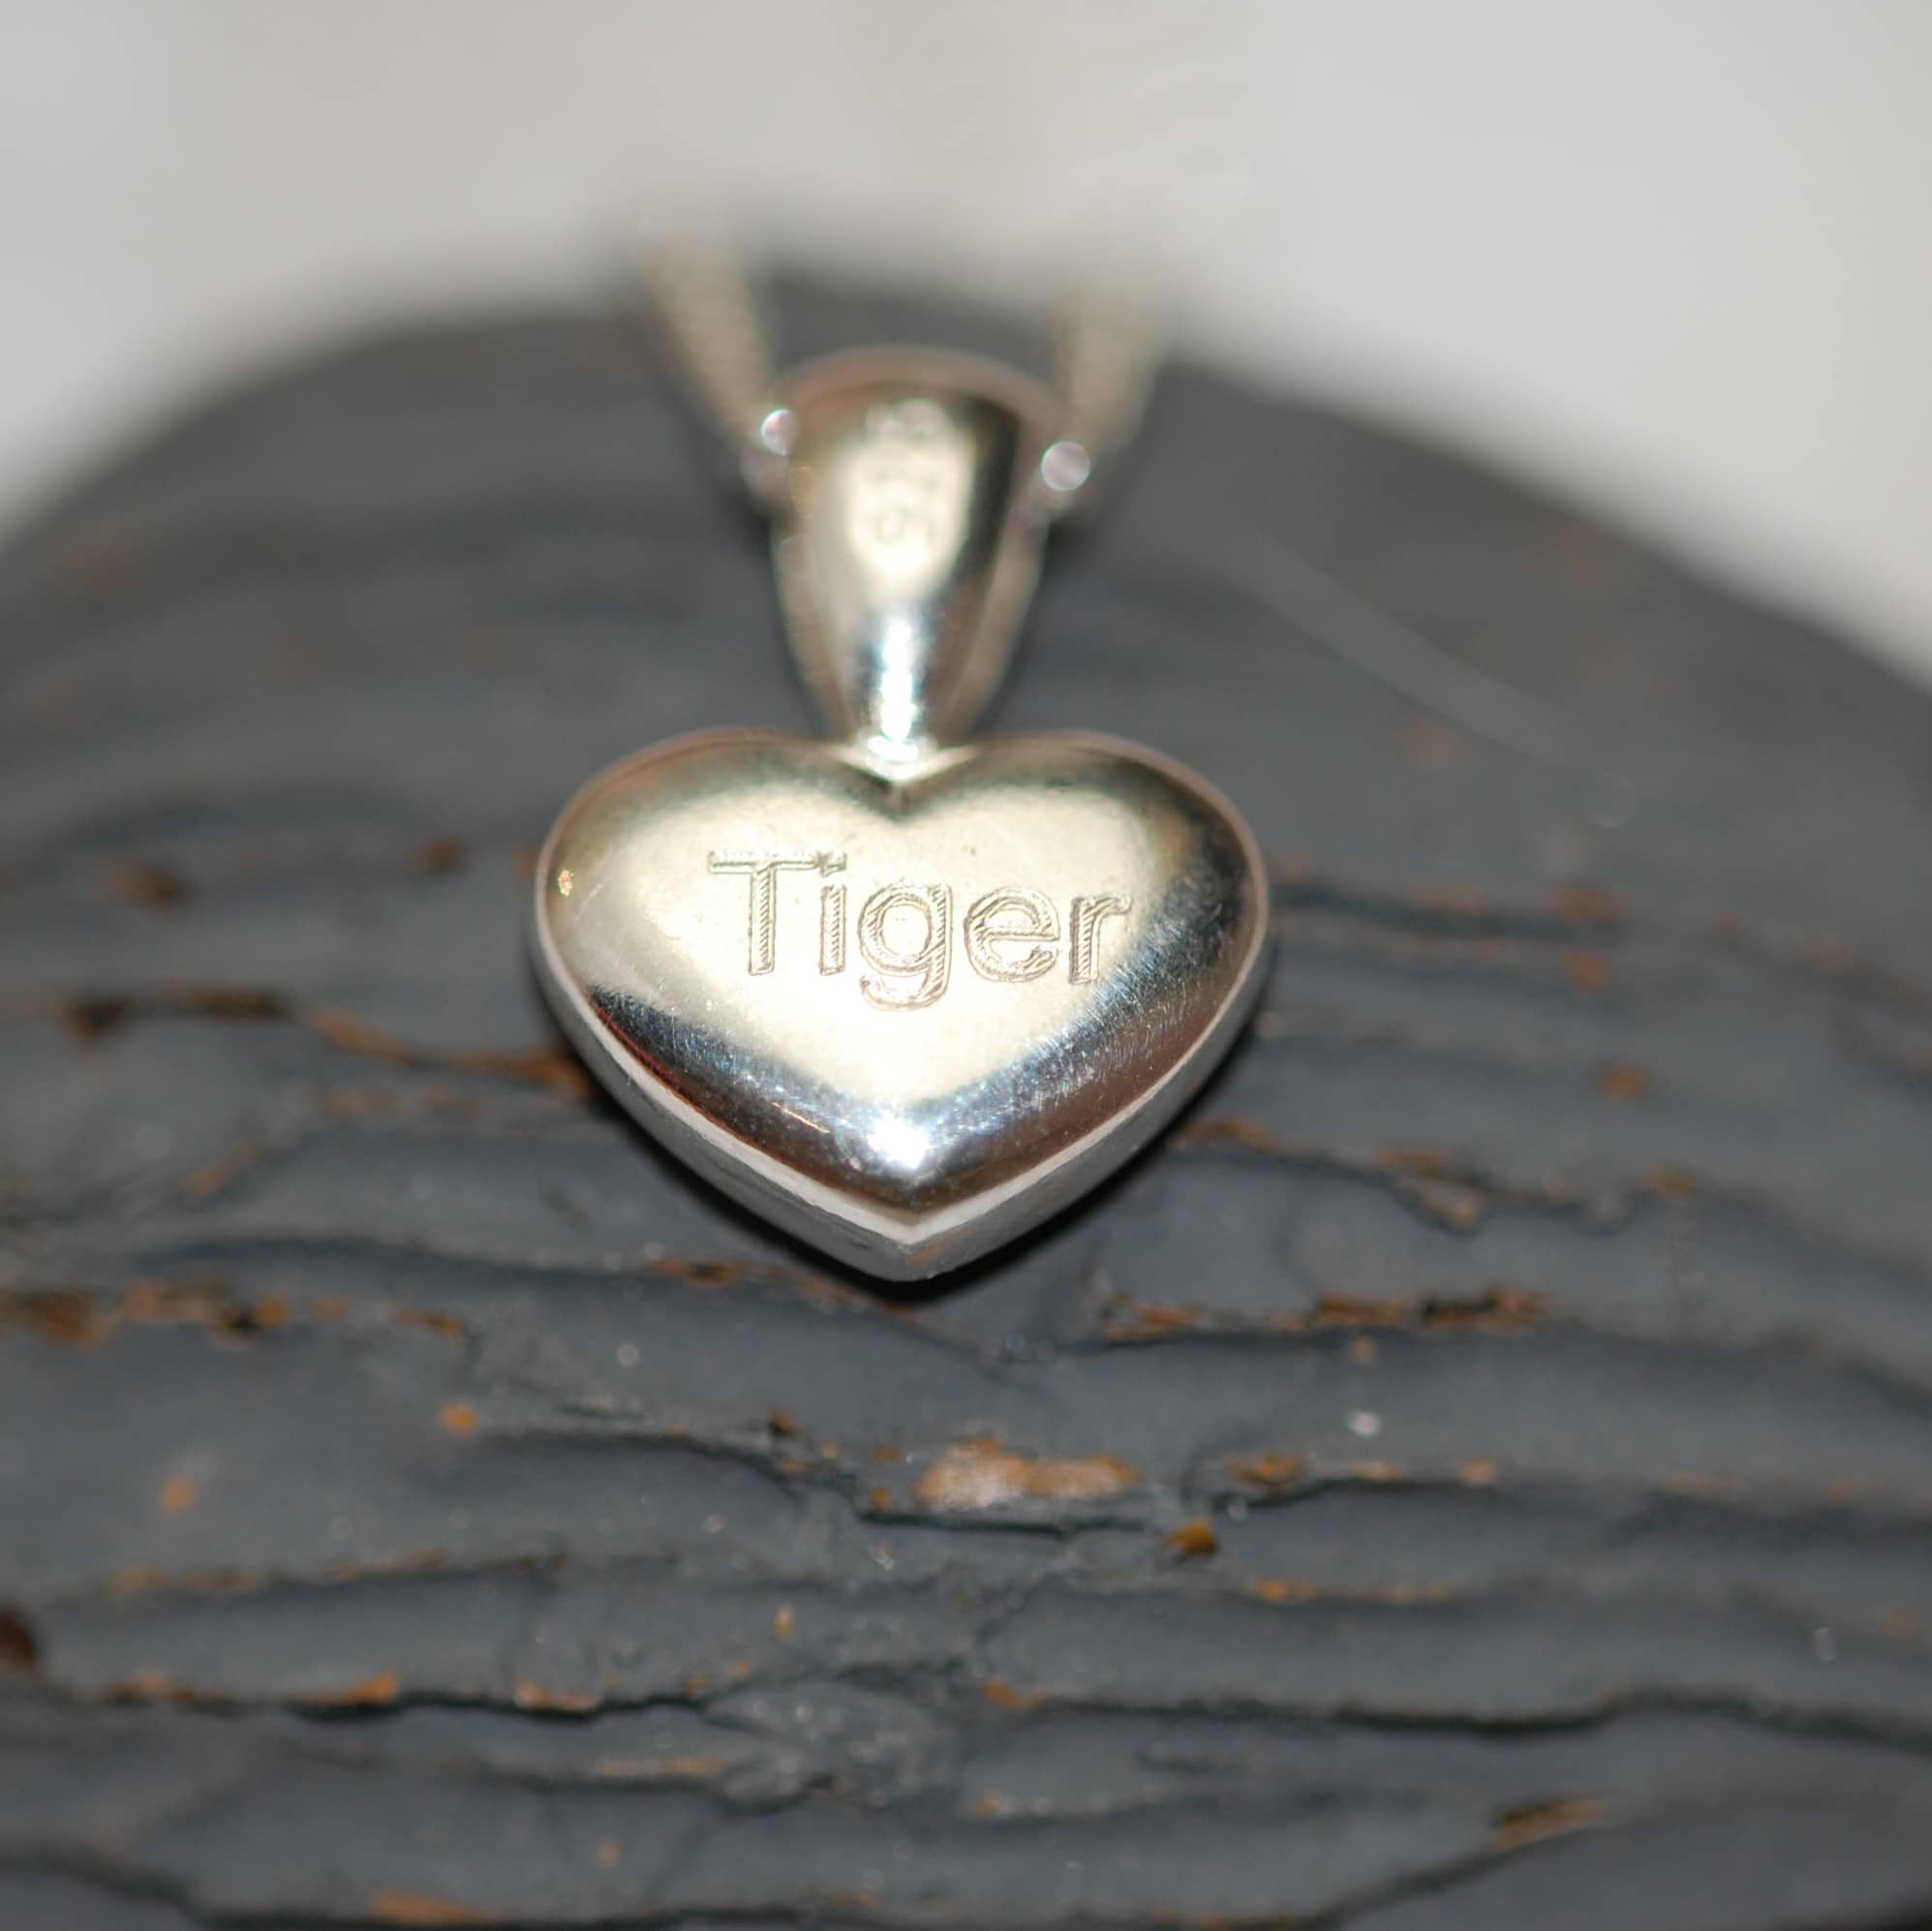 Pet name engraved on the back of silver heart pendant with pet fur or cremation ashes